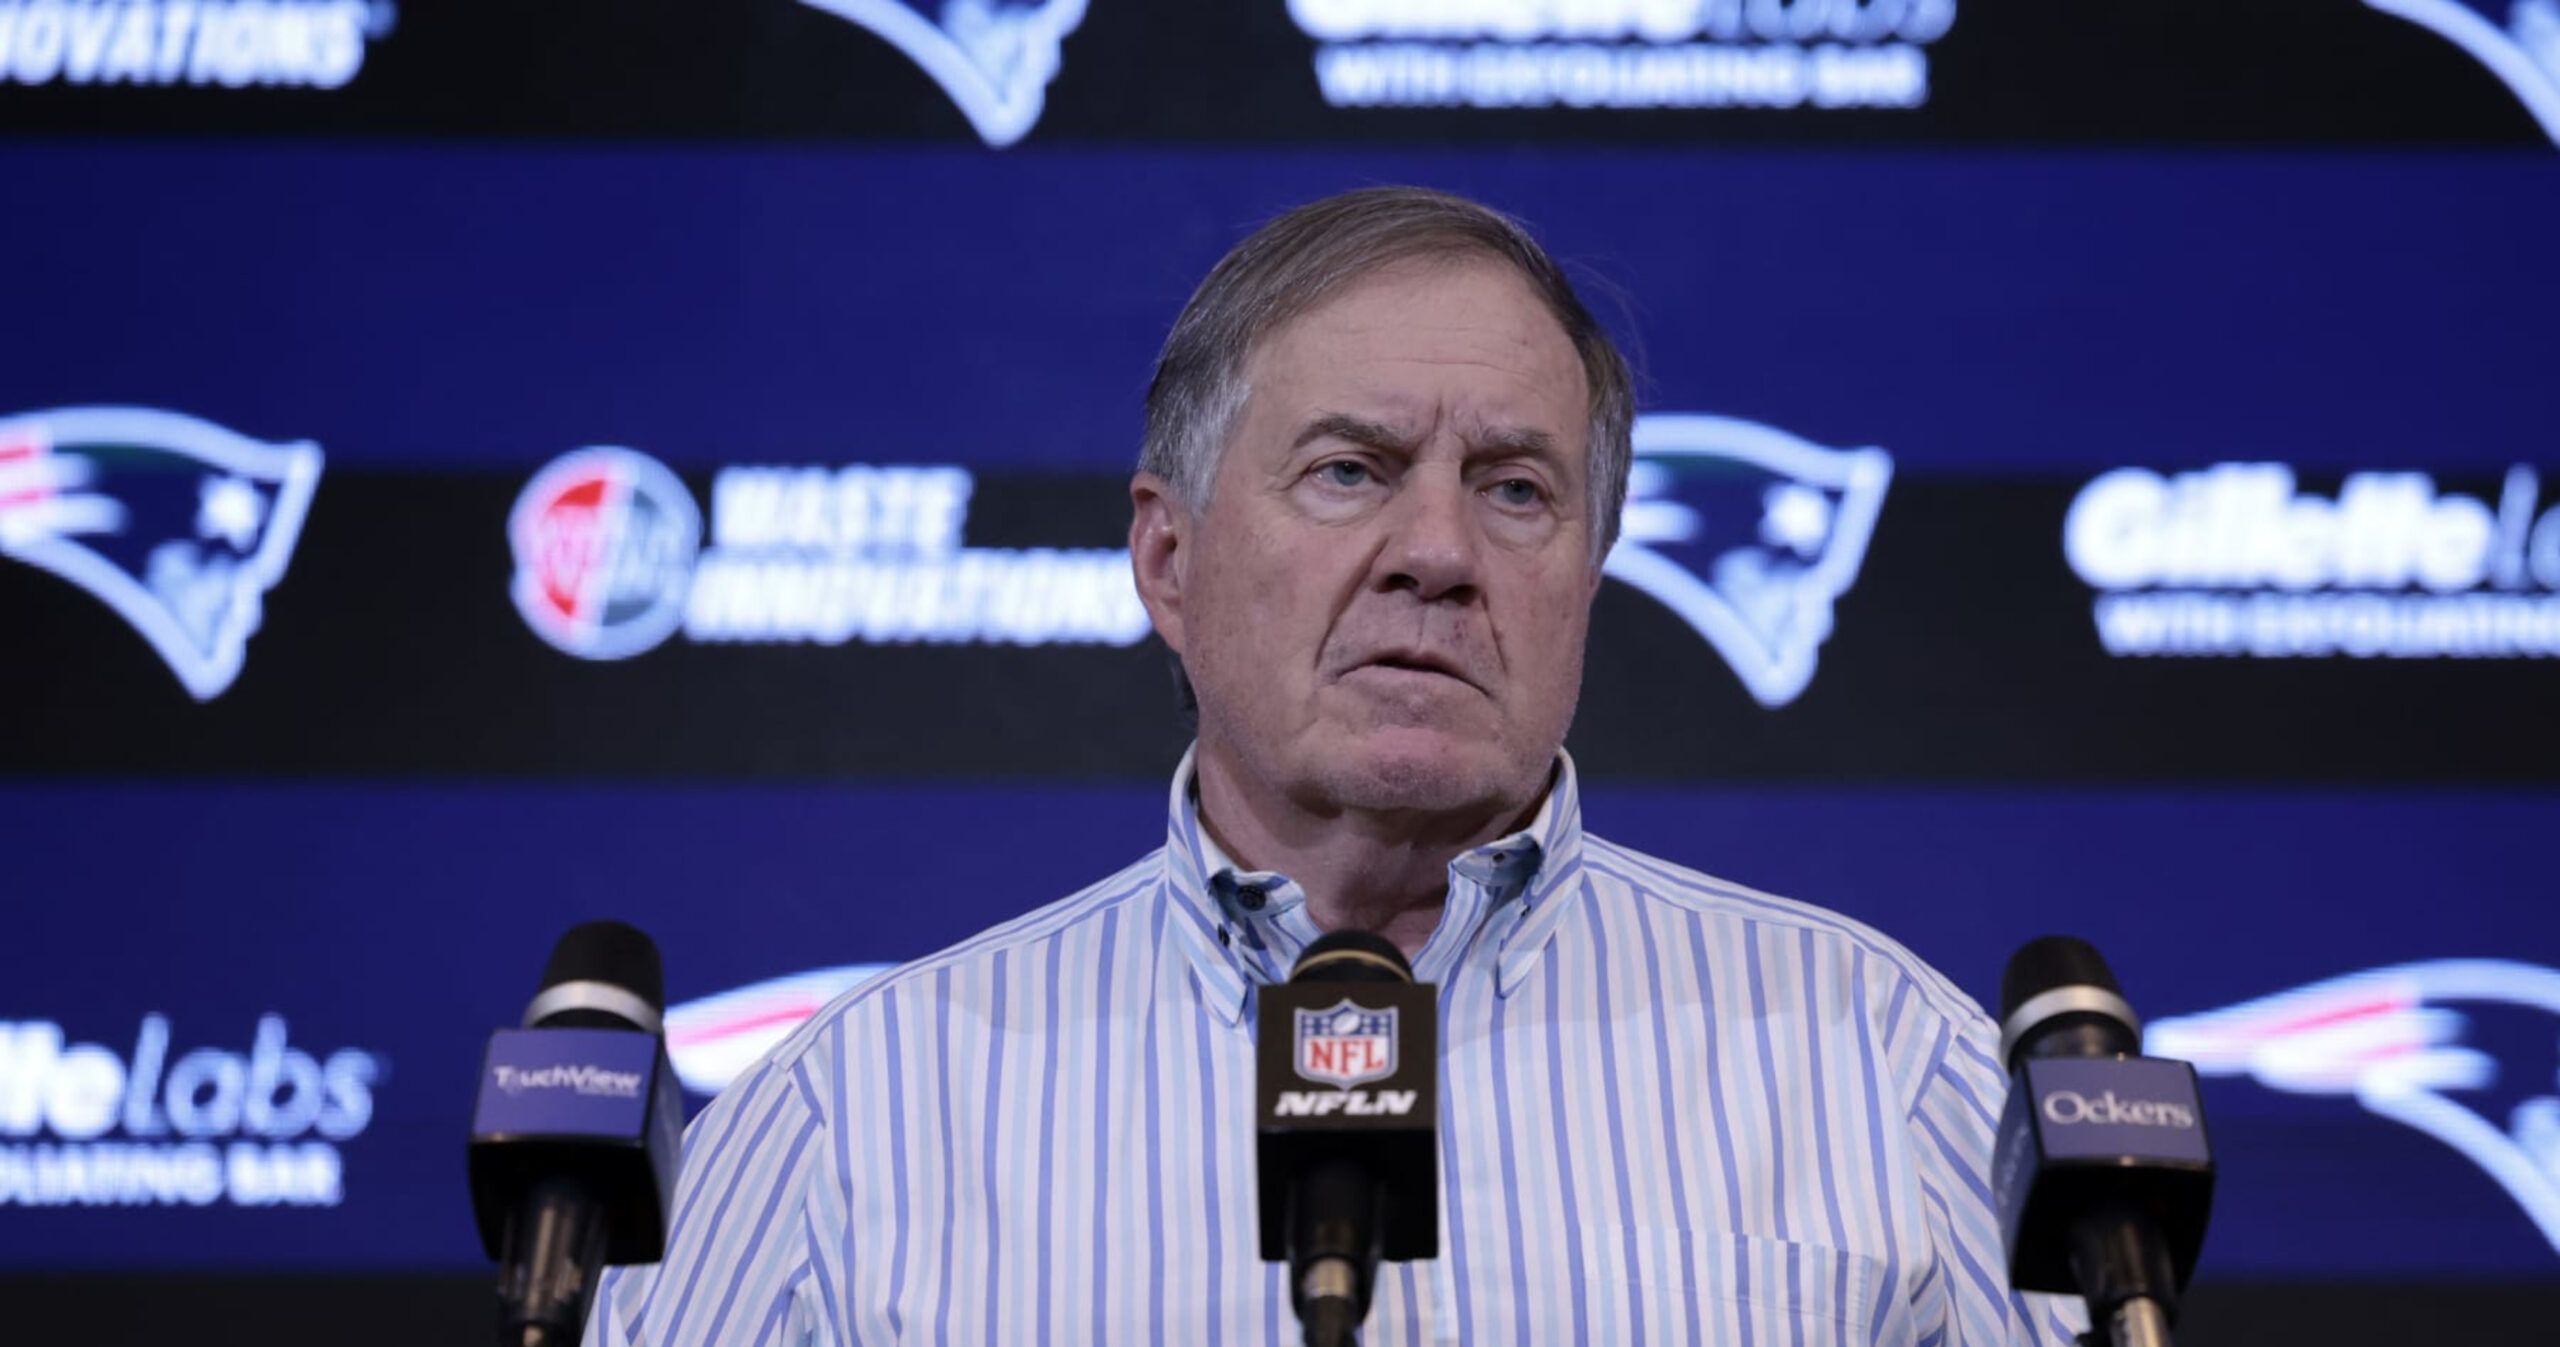 ESPN: Bill Belichick Concentrated on ‘Proficient, But Underachieving Teams’ amid Falcons Buzz